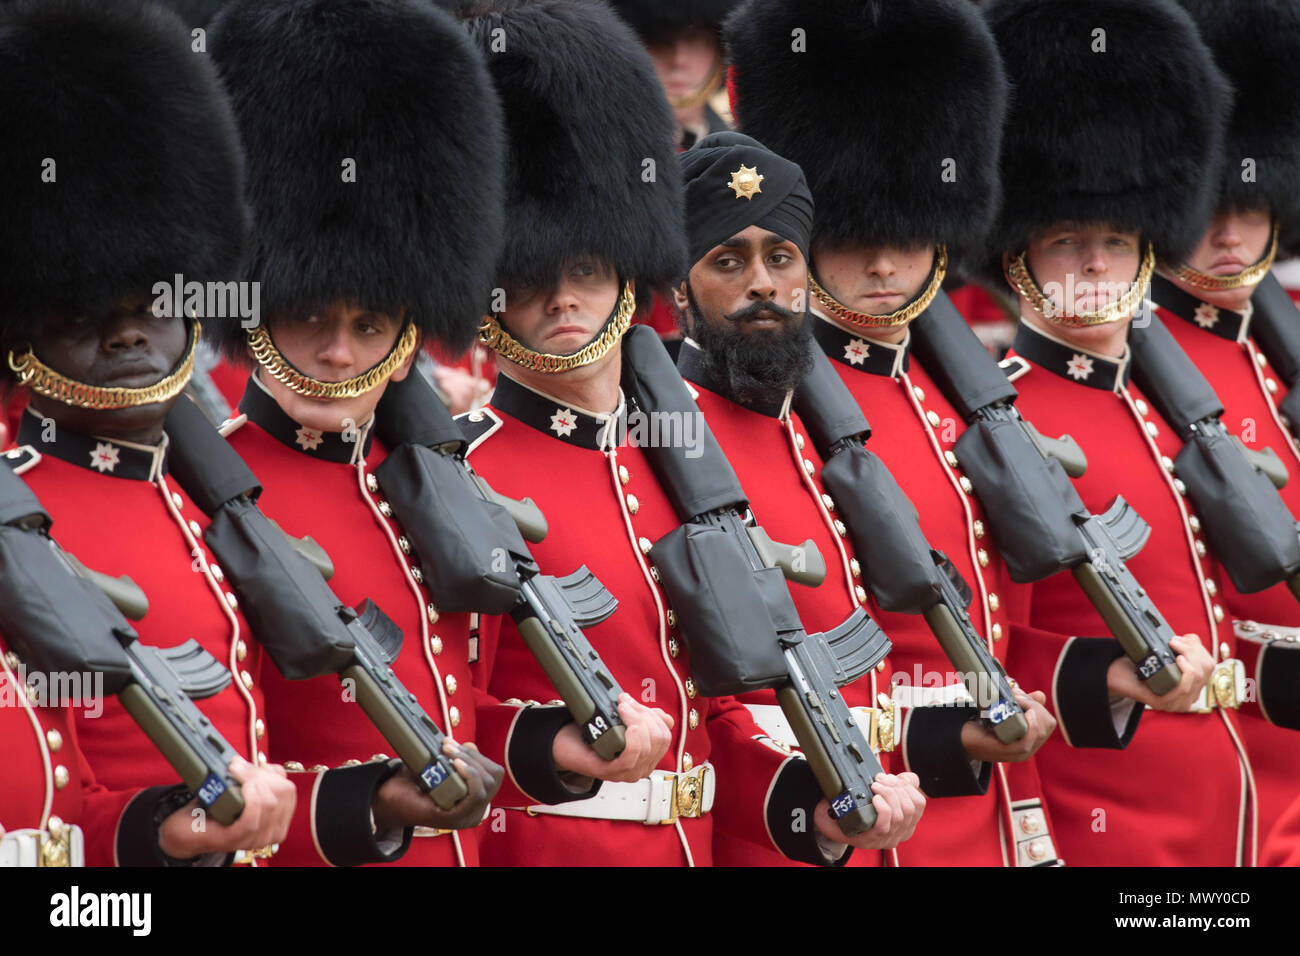 A Sikh member of the Coldstream Guards wearing a turban as he takes part in the Colonel's Review, the final rehearsal for Trooping the Colour, the Queen's annual birthday parade, in Central London. Stock Photo